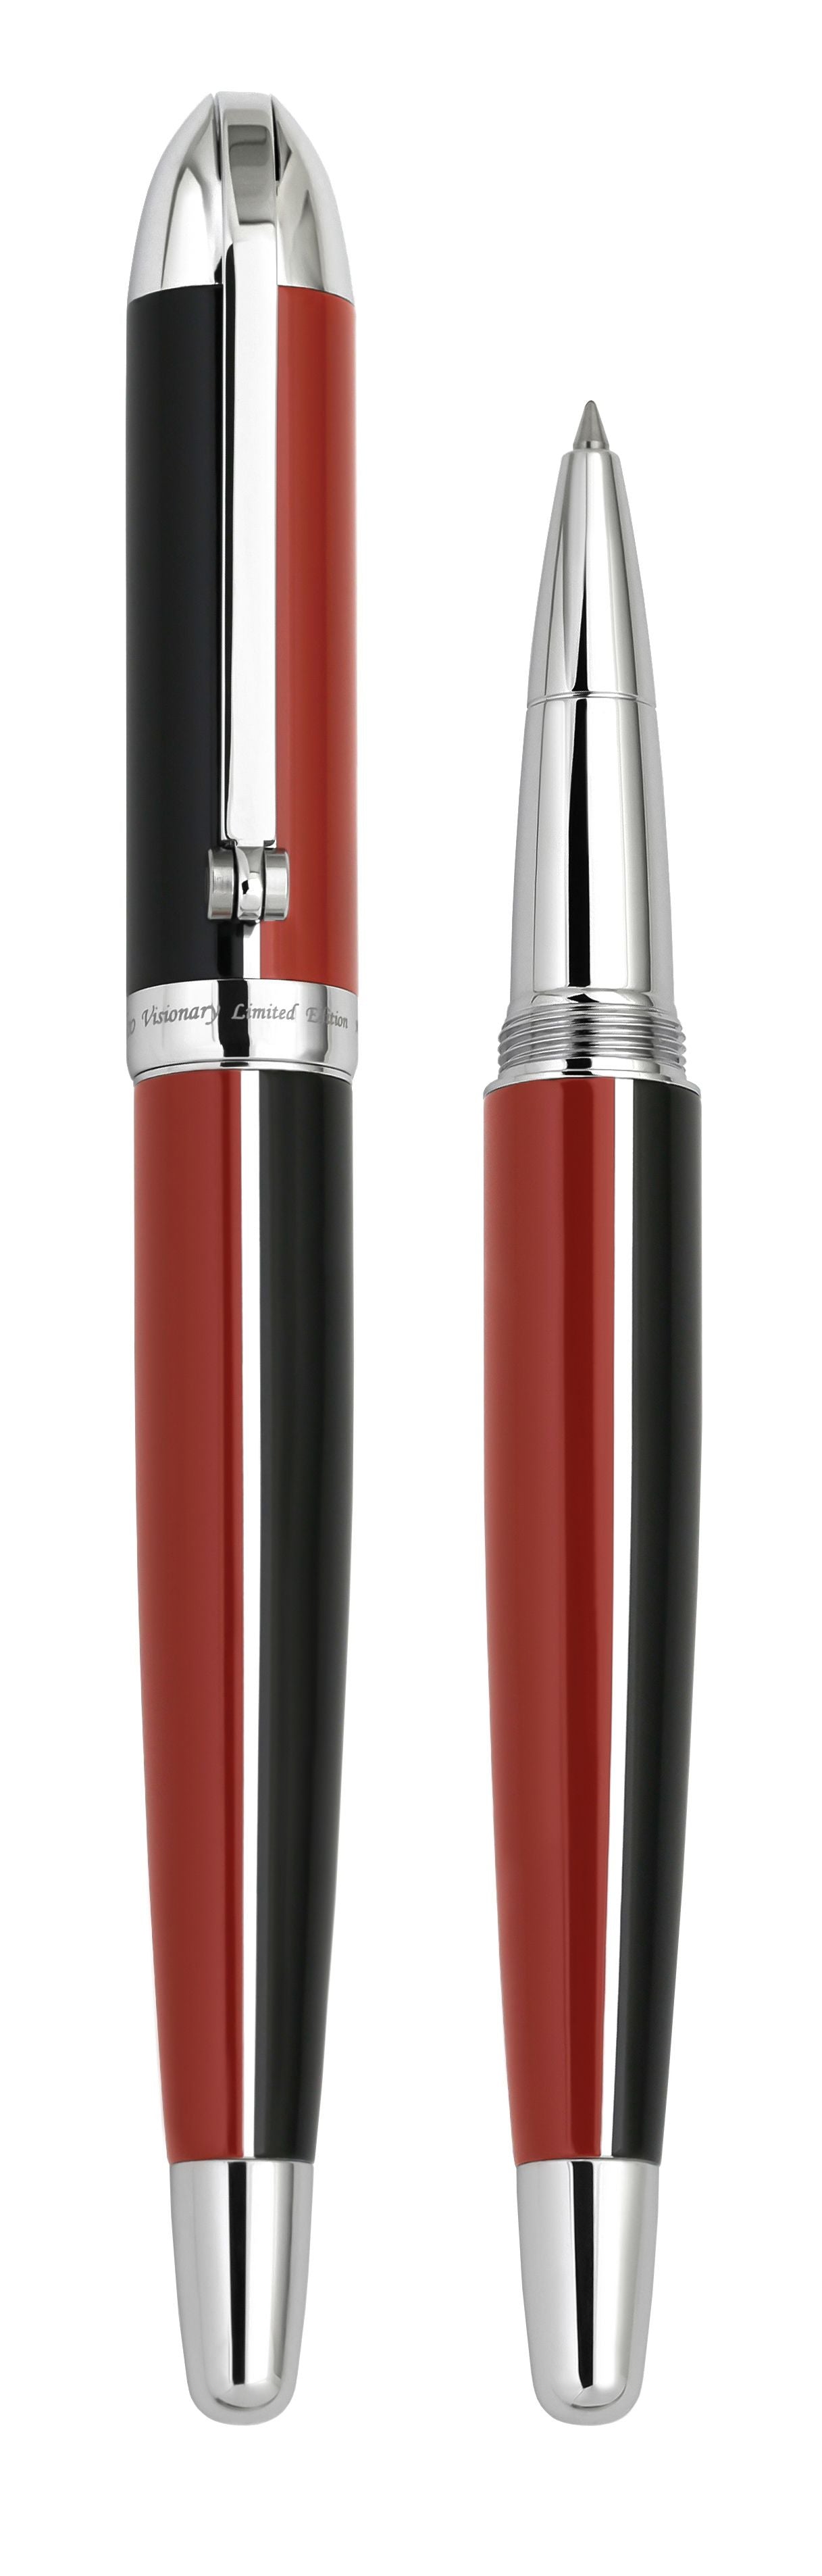 Xezo - Vertical view of two Visionary Red/Black R rollerball pens. The pen on the left is capped, and the pen on the right has no cap